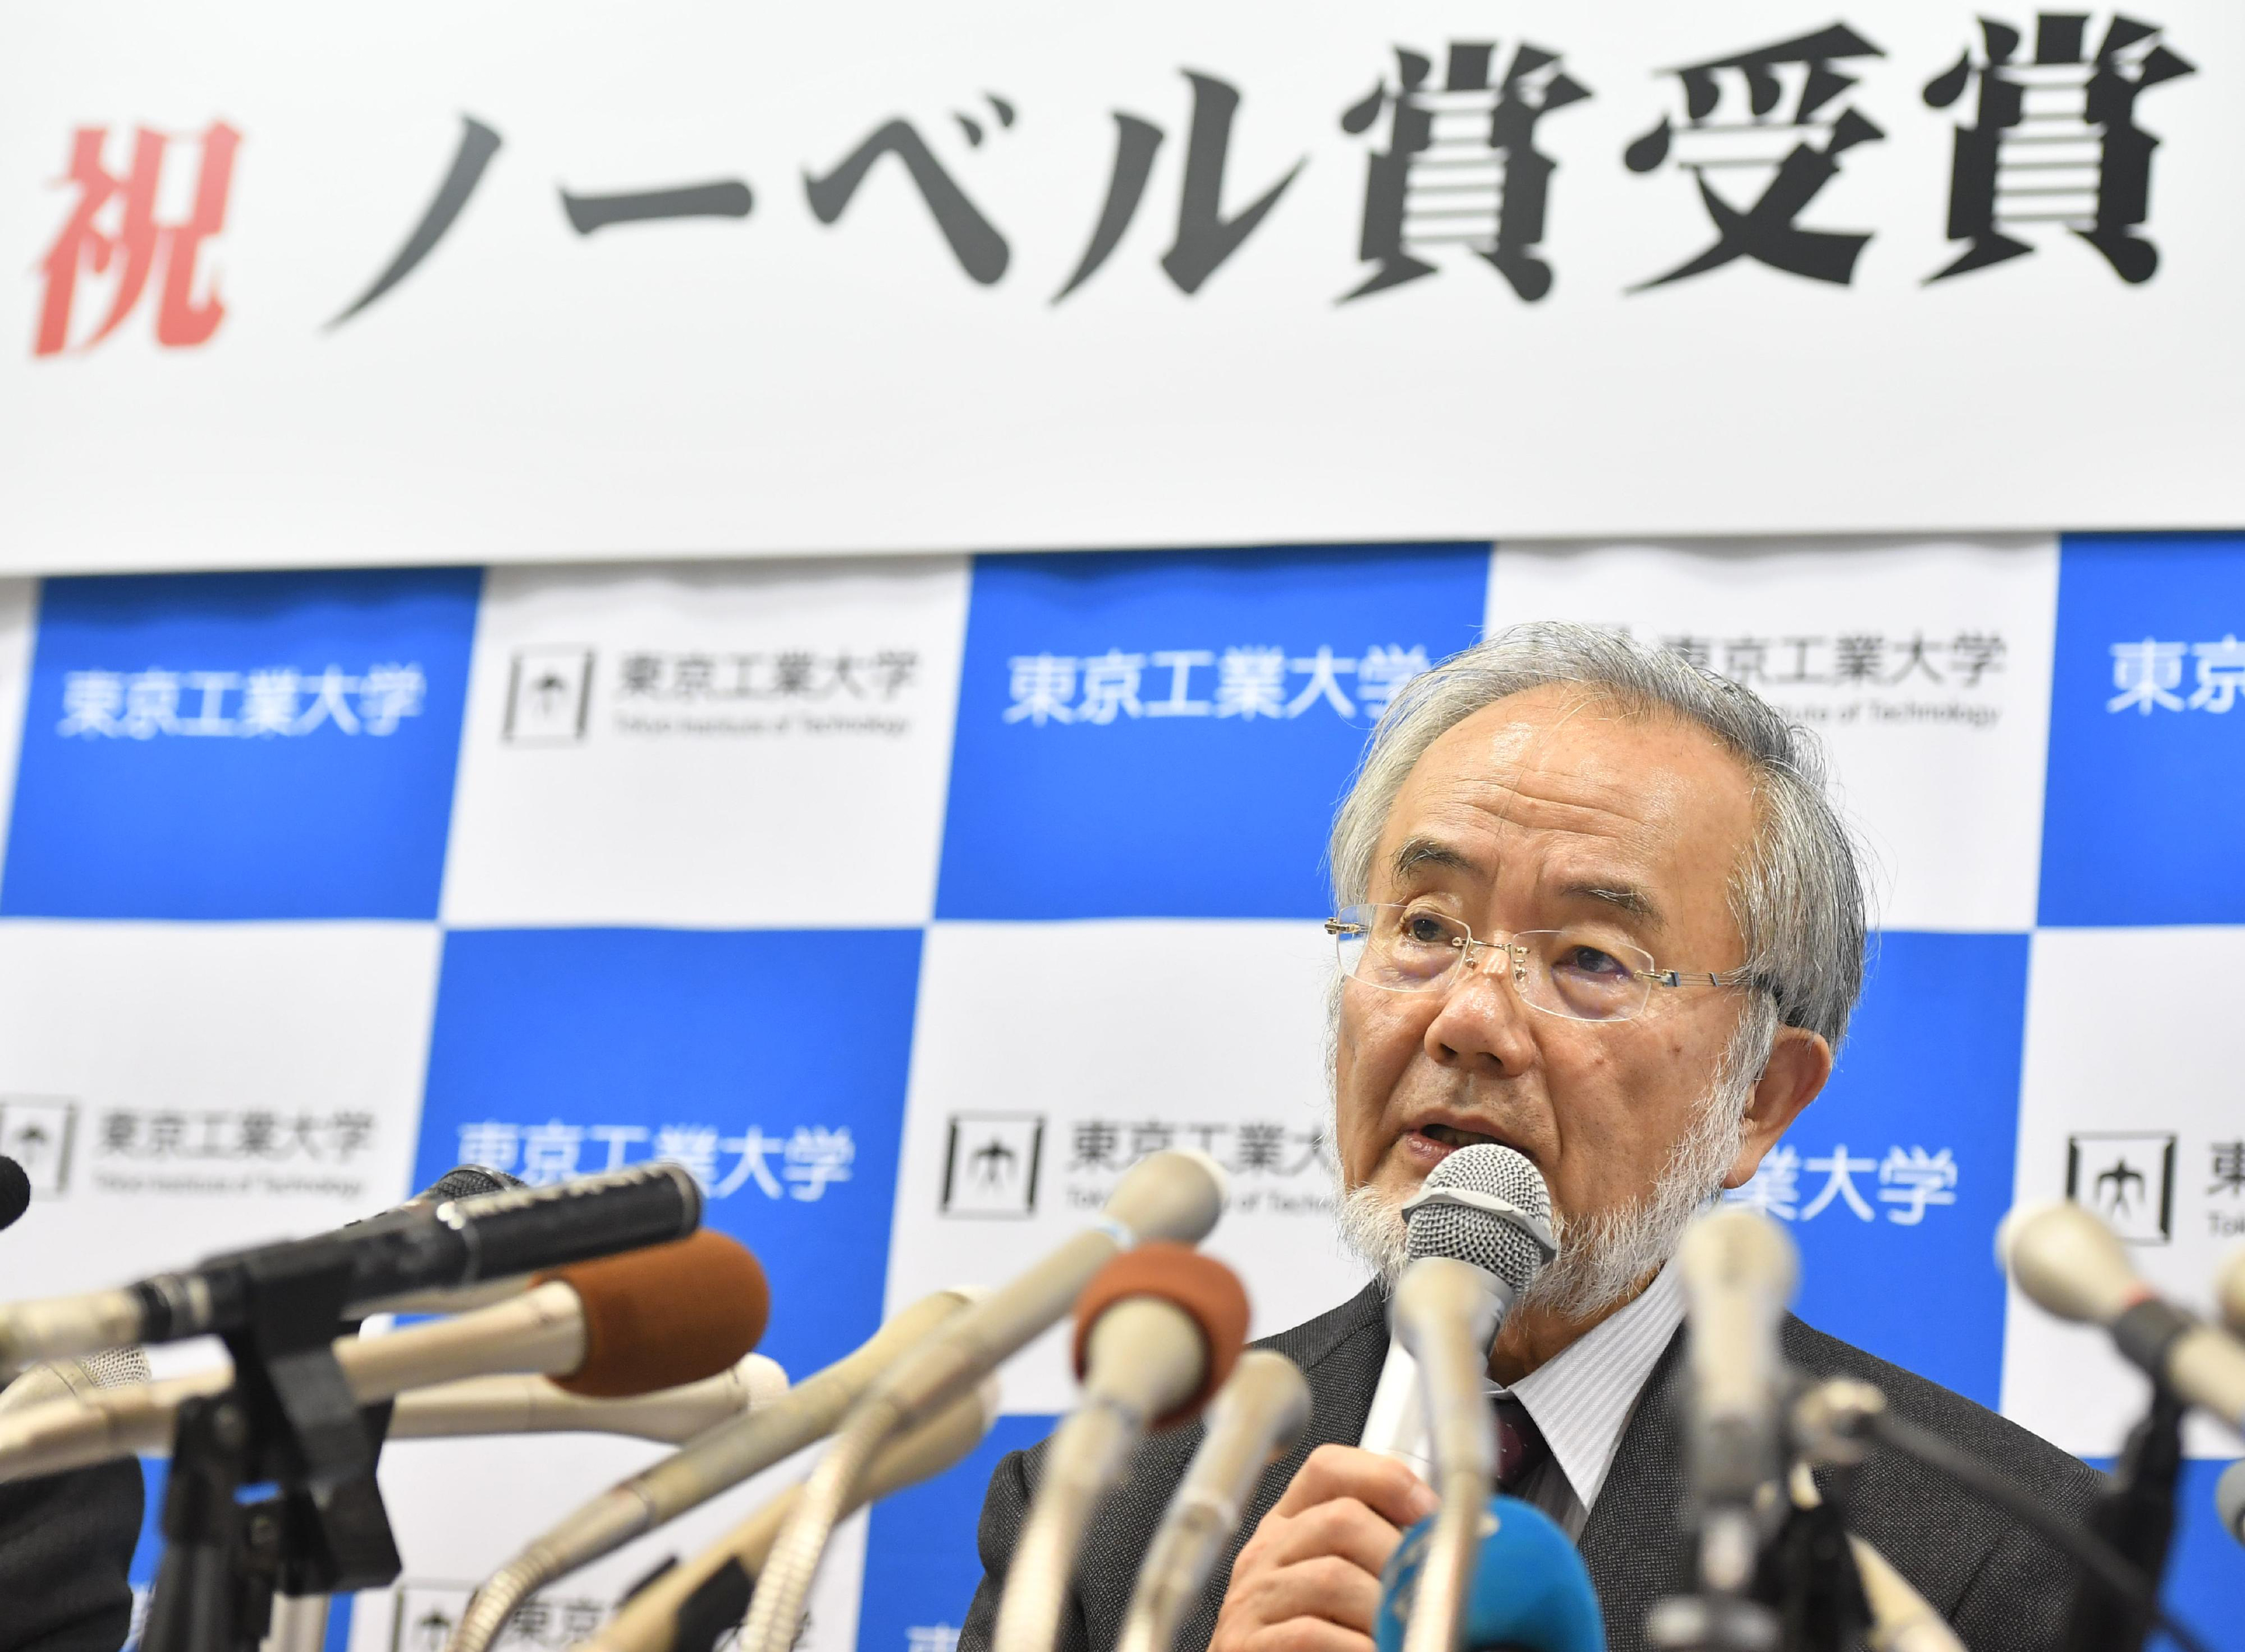 Yoshinori Ohsumi, 71, an honorary professor at Tokyo Institute of Technology speaks at a news conference at  its university facility in Tokyo on Oct. 3, 2016. 2016. (Noriaki Sasaki—AP)